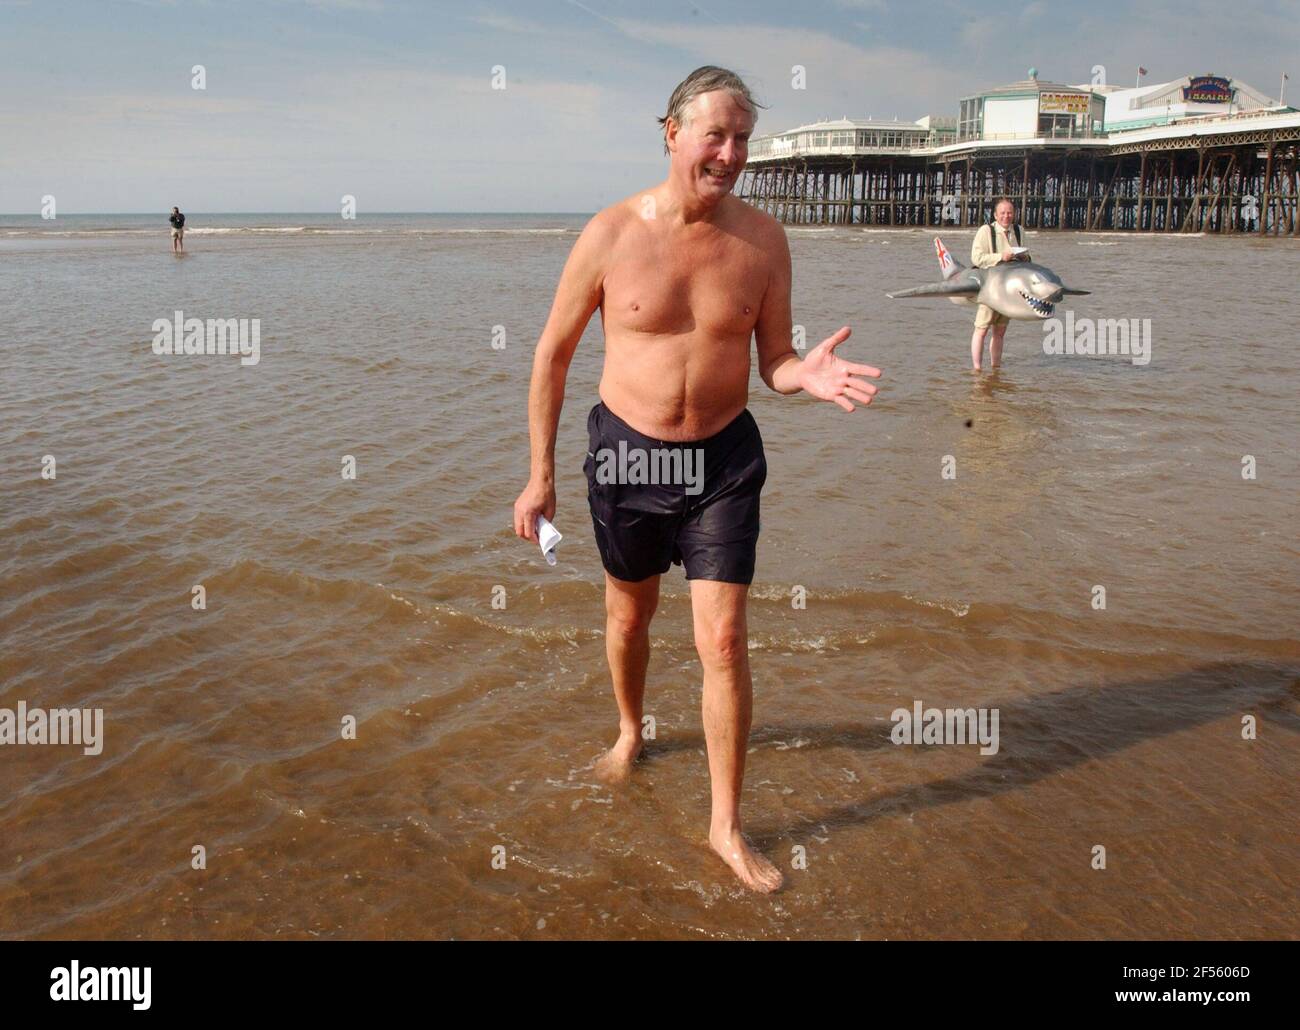 MEACHER EMERGES FROM THE WATER IN BLACKPOOL AFTERH HIS SWIM GREETED BY A FOE SHARK PROTESTING ABOUT AIRCRAFT POLLUTION. 2/10/02 PILSTON Stock Photo